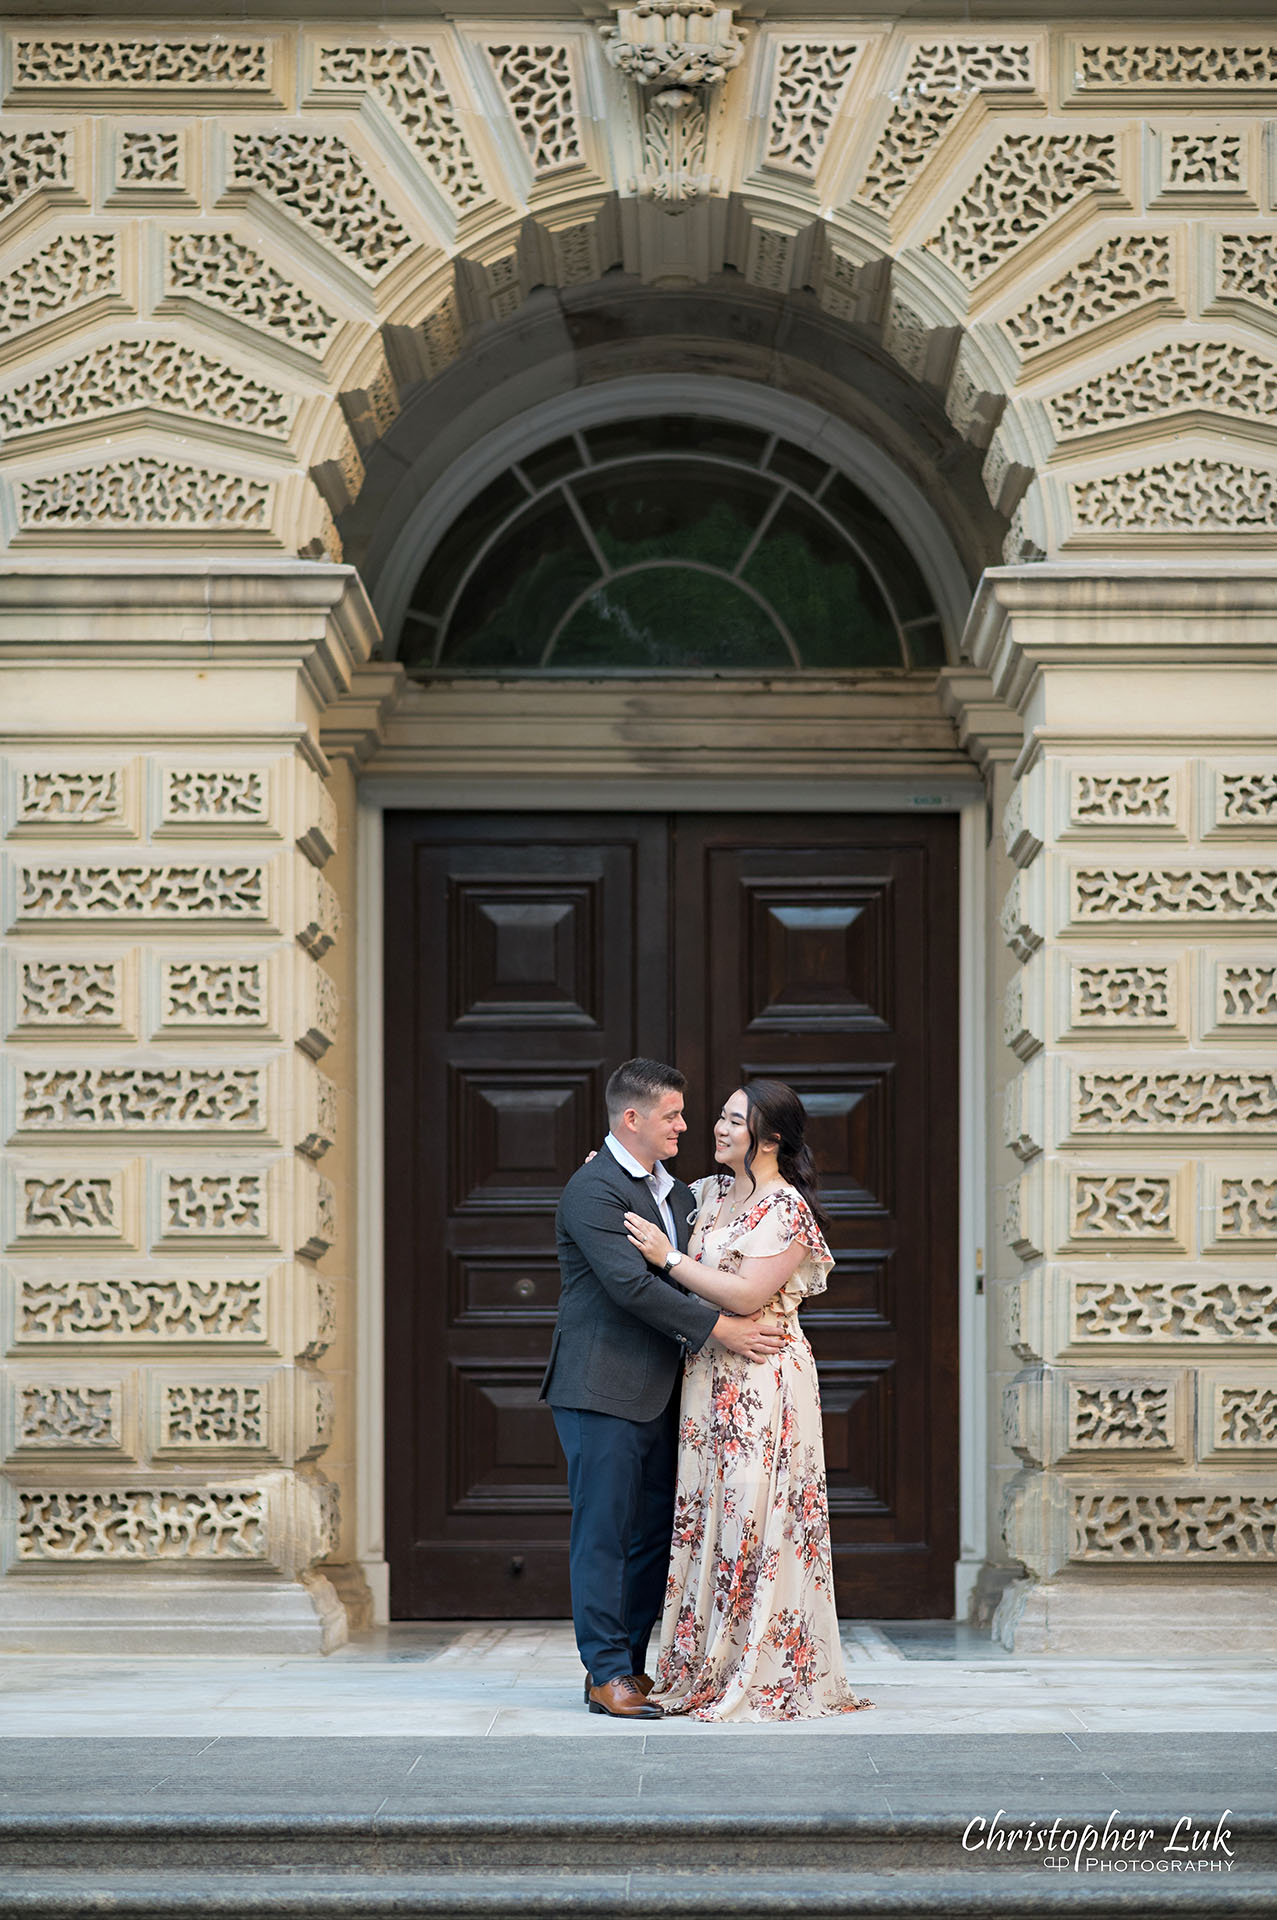 Christopher Luk Toronto Wedding Photographer Engagement Photos Pictures Session Osgoode Hall Nathan Philips Square City Hall Bride Groom Natural Candid Photojournalistic Organic Sunset Hug Hold Arch Archway Portrait